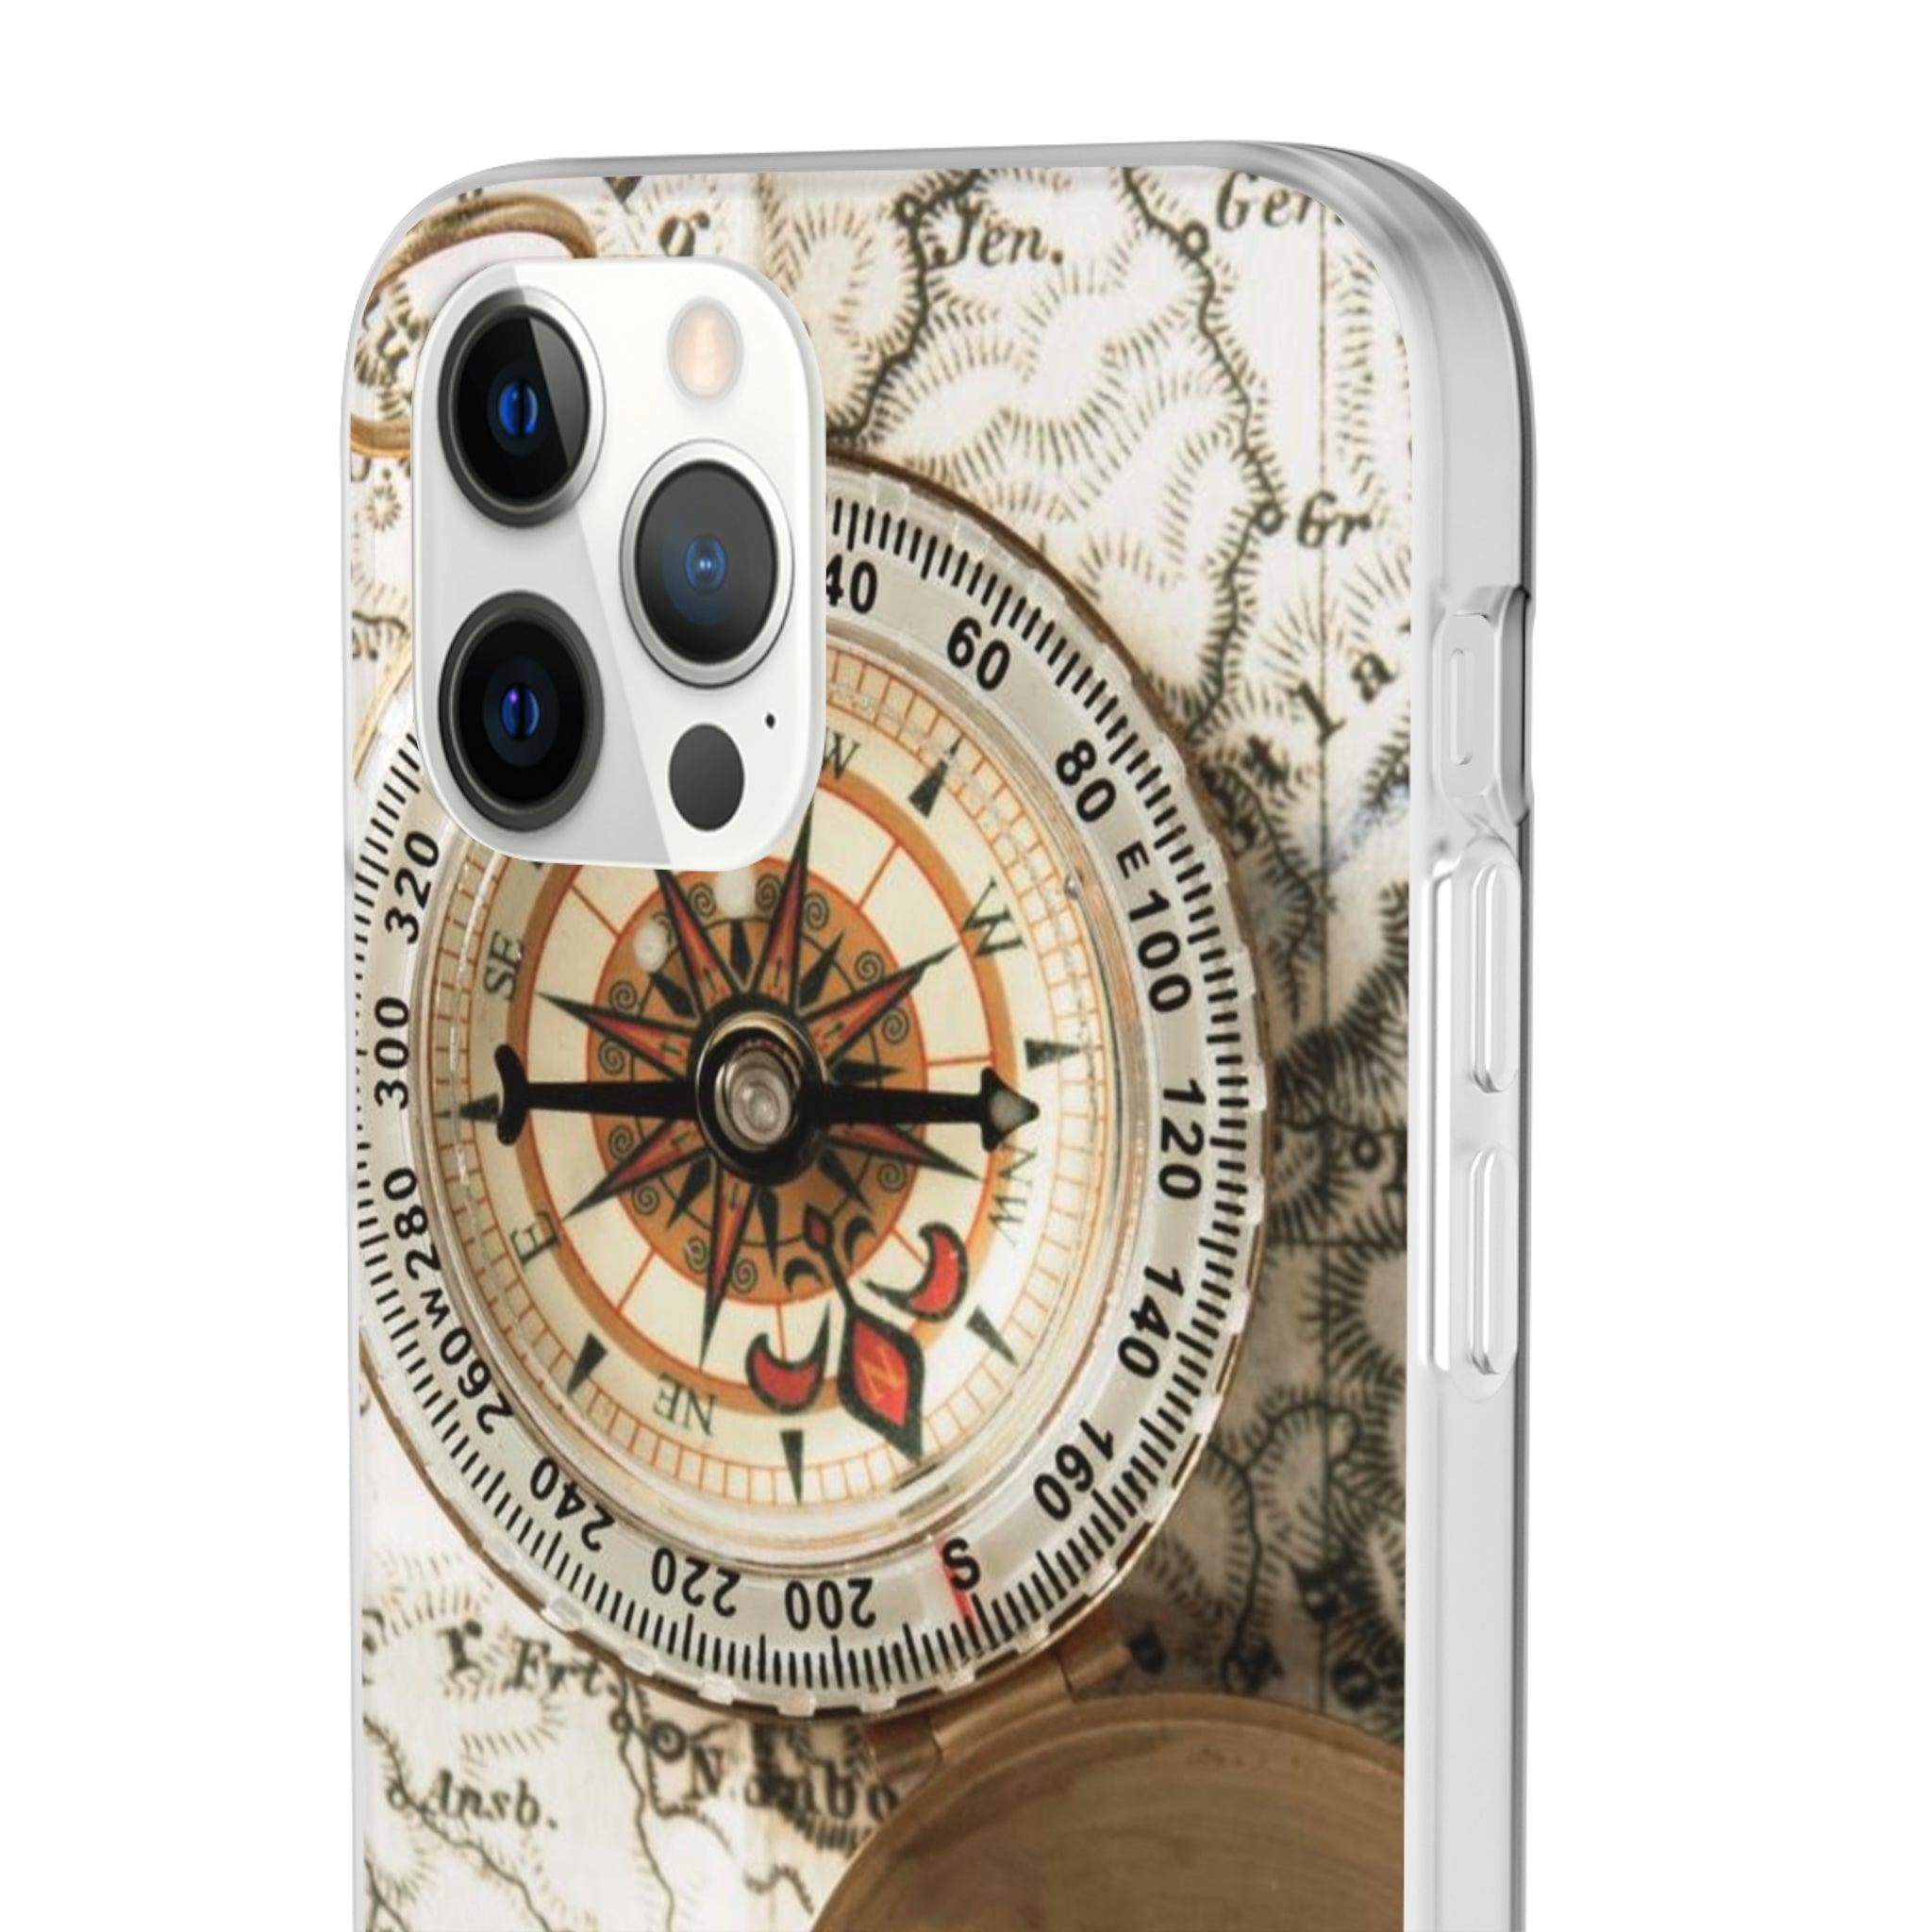 World Map and Compass Slim - PrettyKase